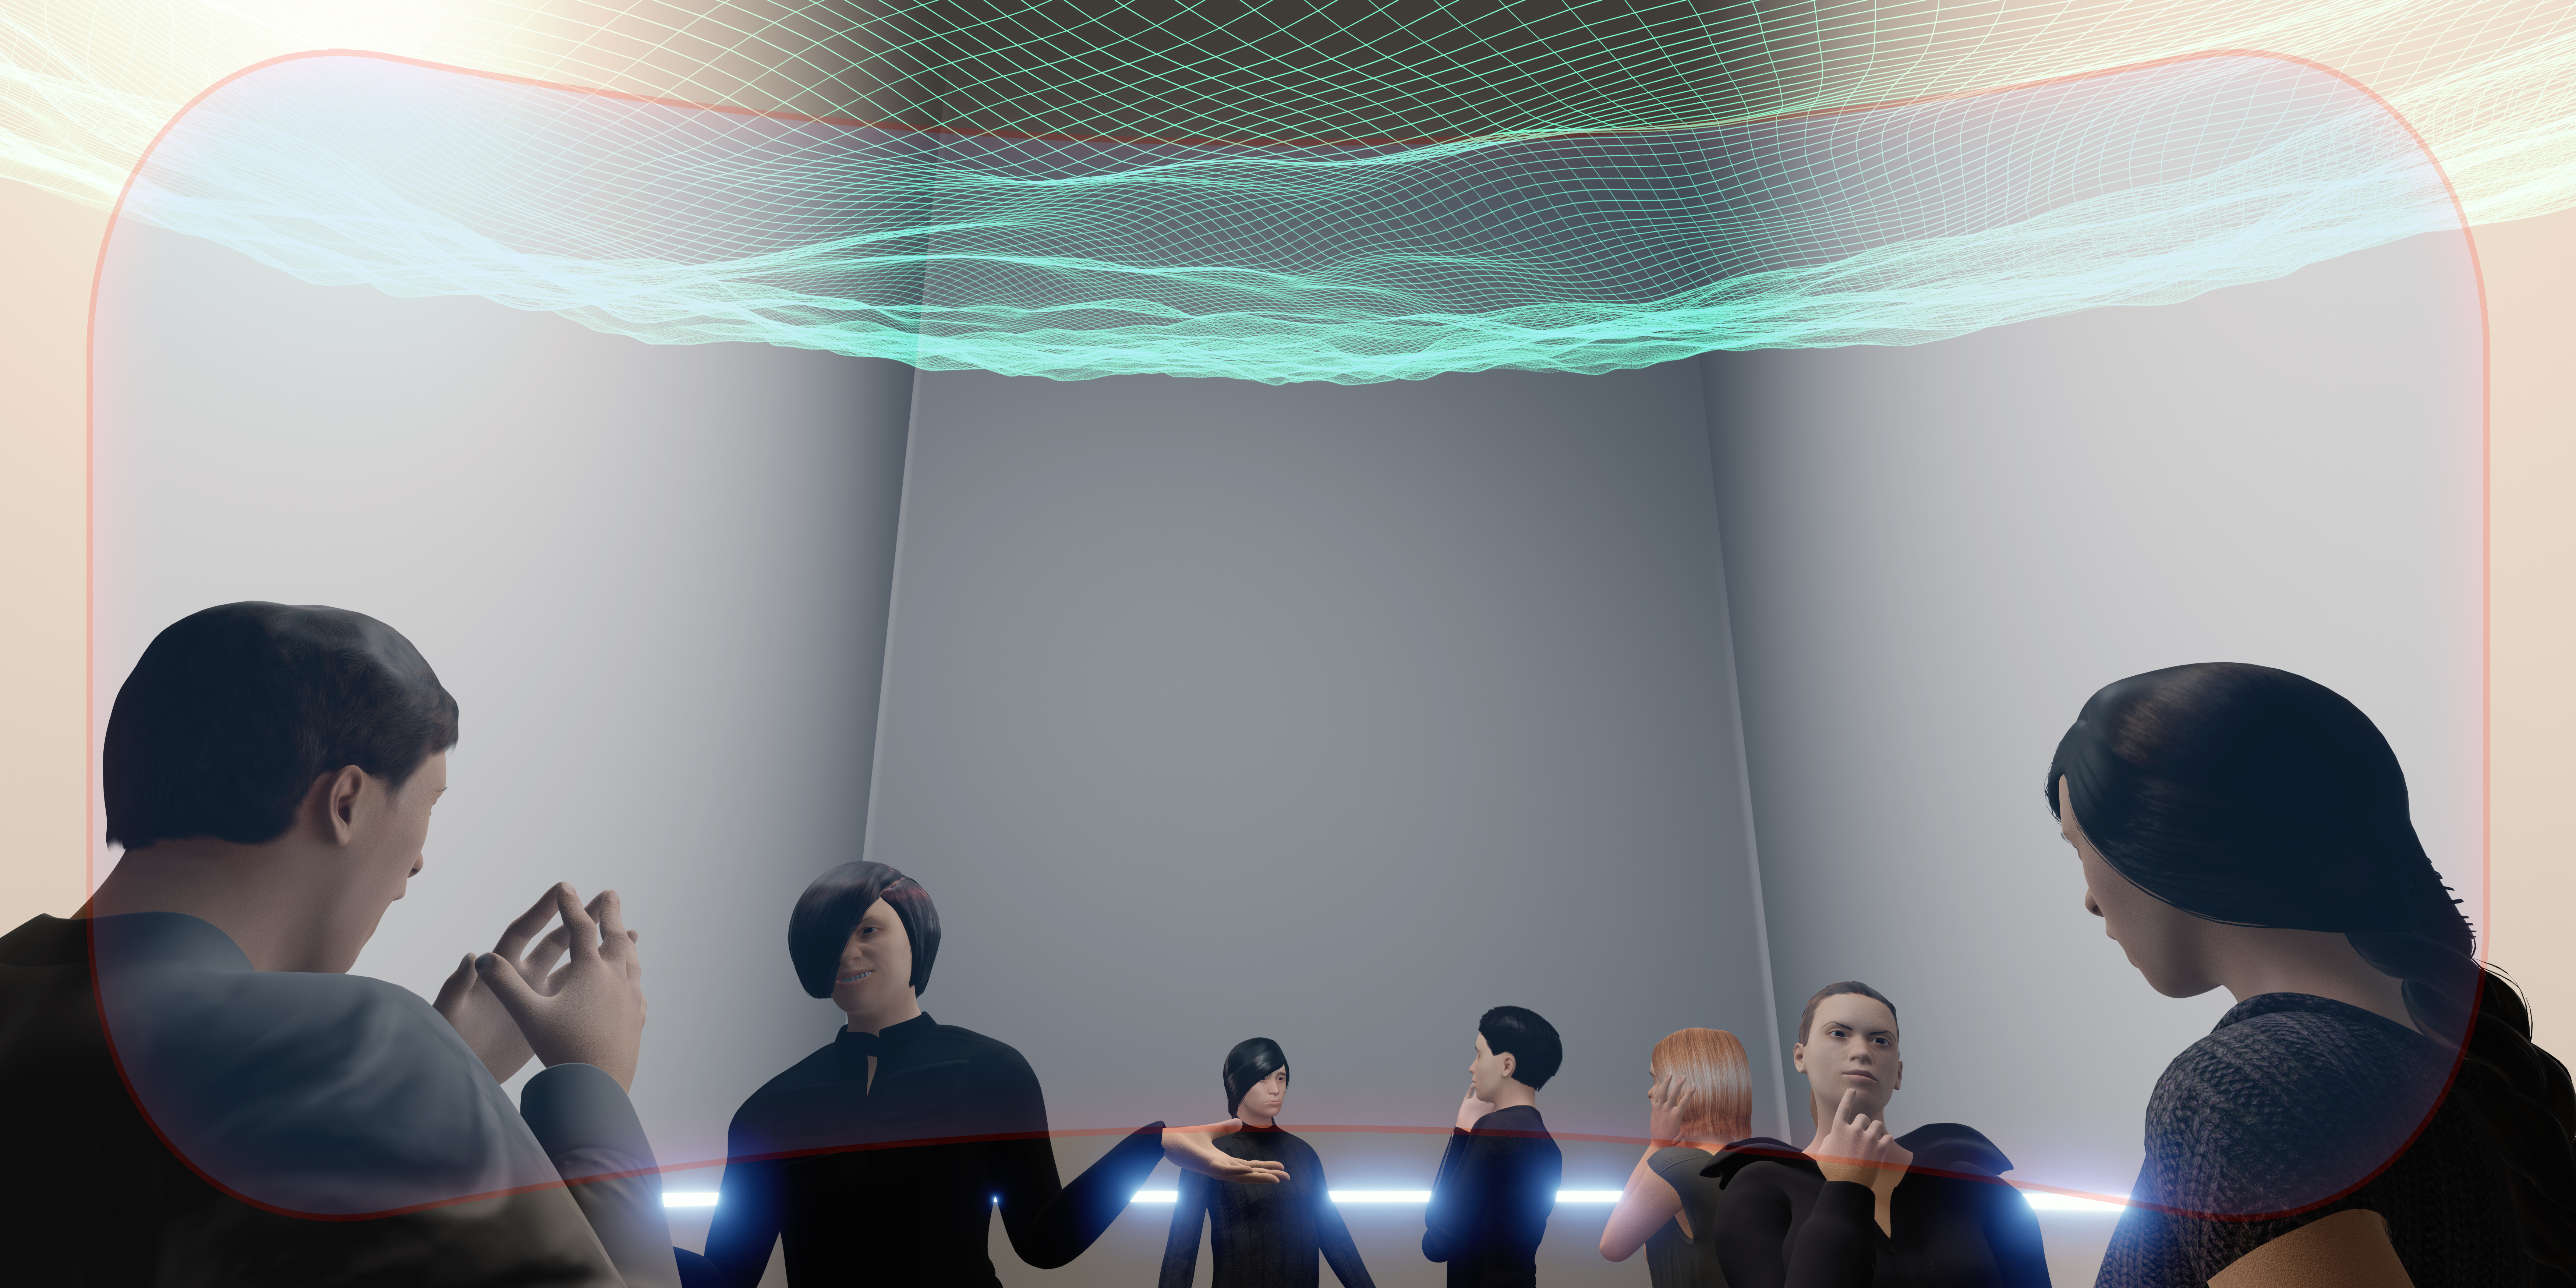 The Future of the Metaverse, Imagining the Internet